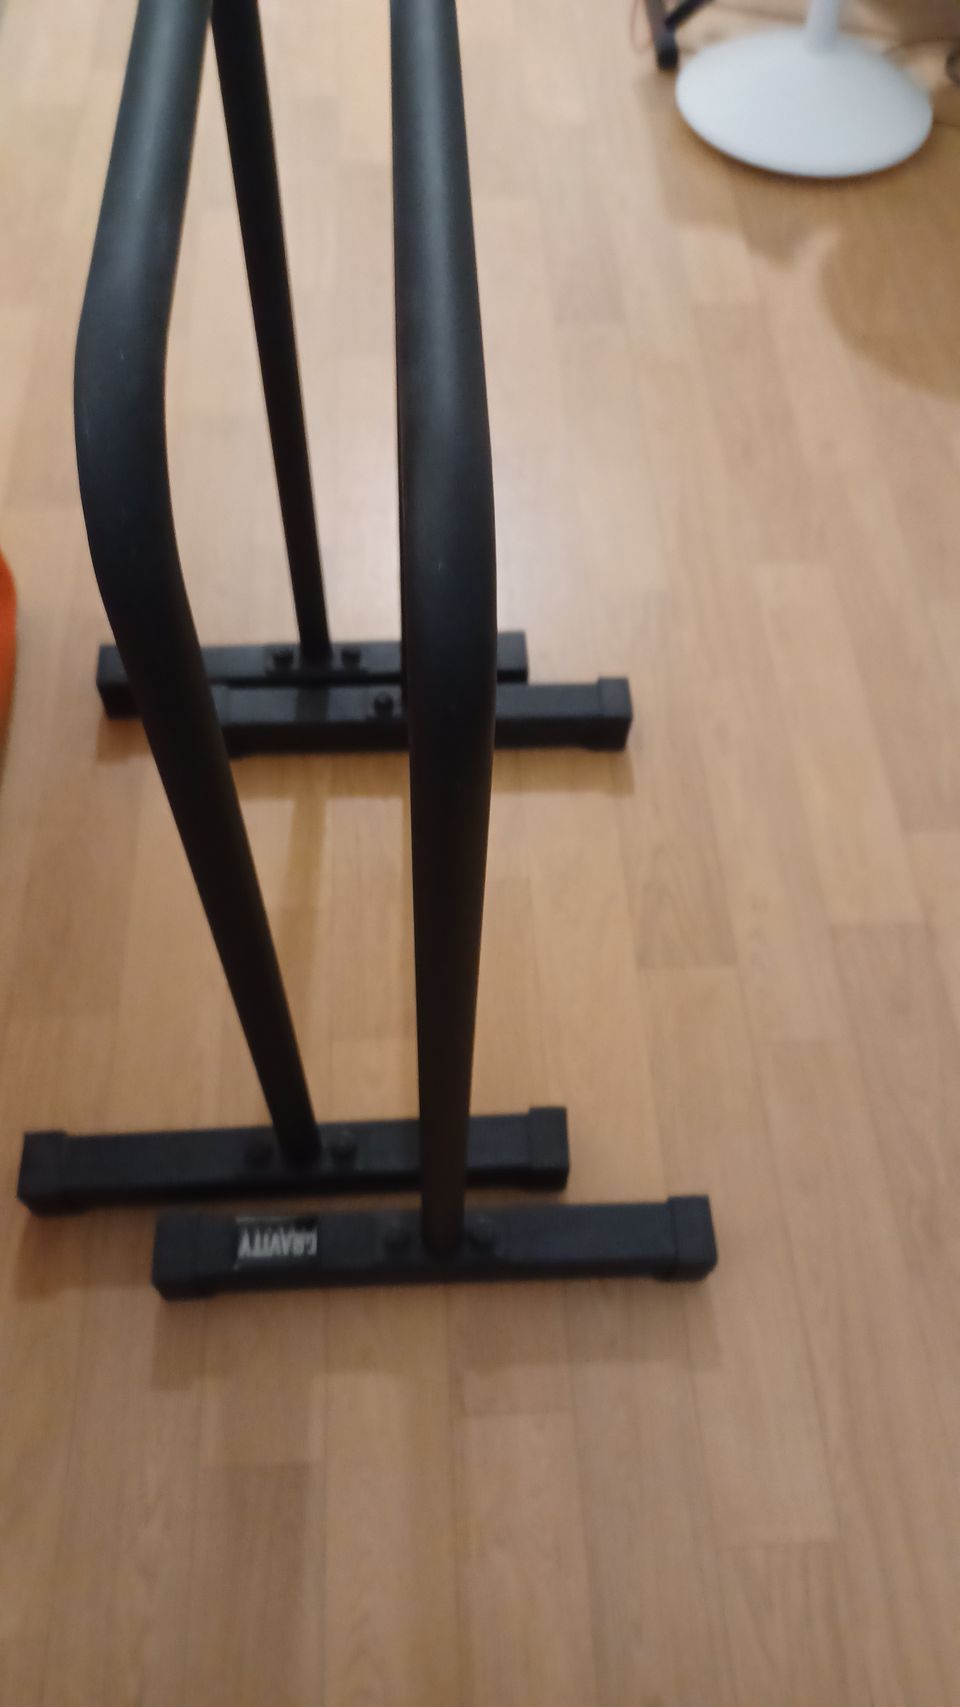 Gravity Fitness XL Parallettes / Dips bars